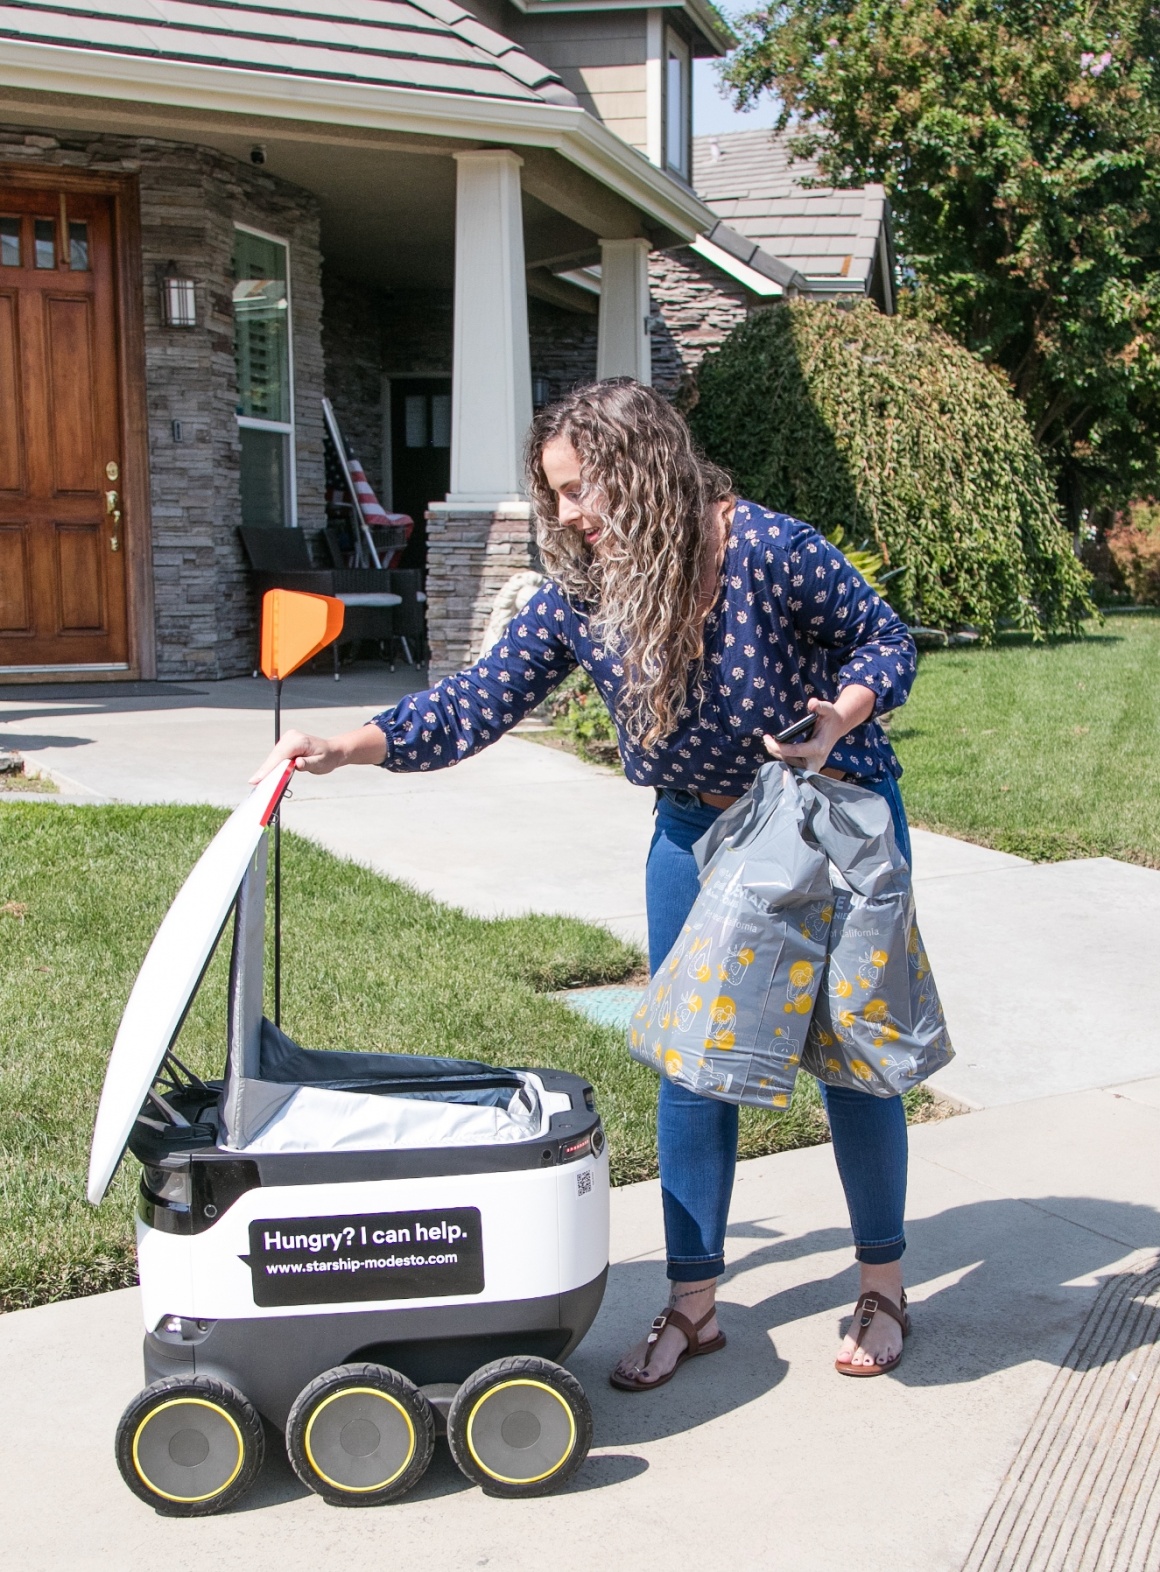 A woman is taking shopping bags from a delivery robot...